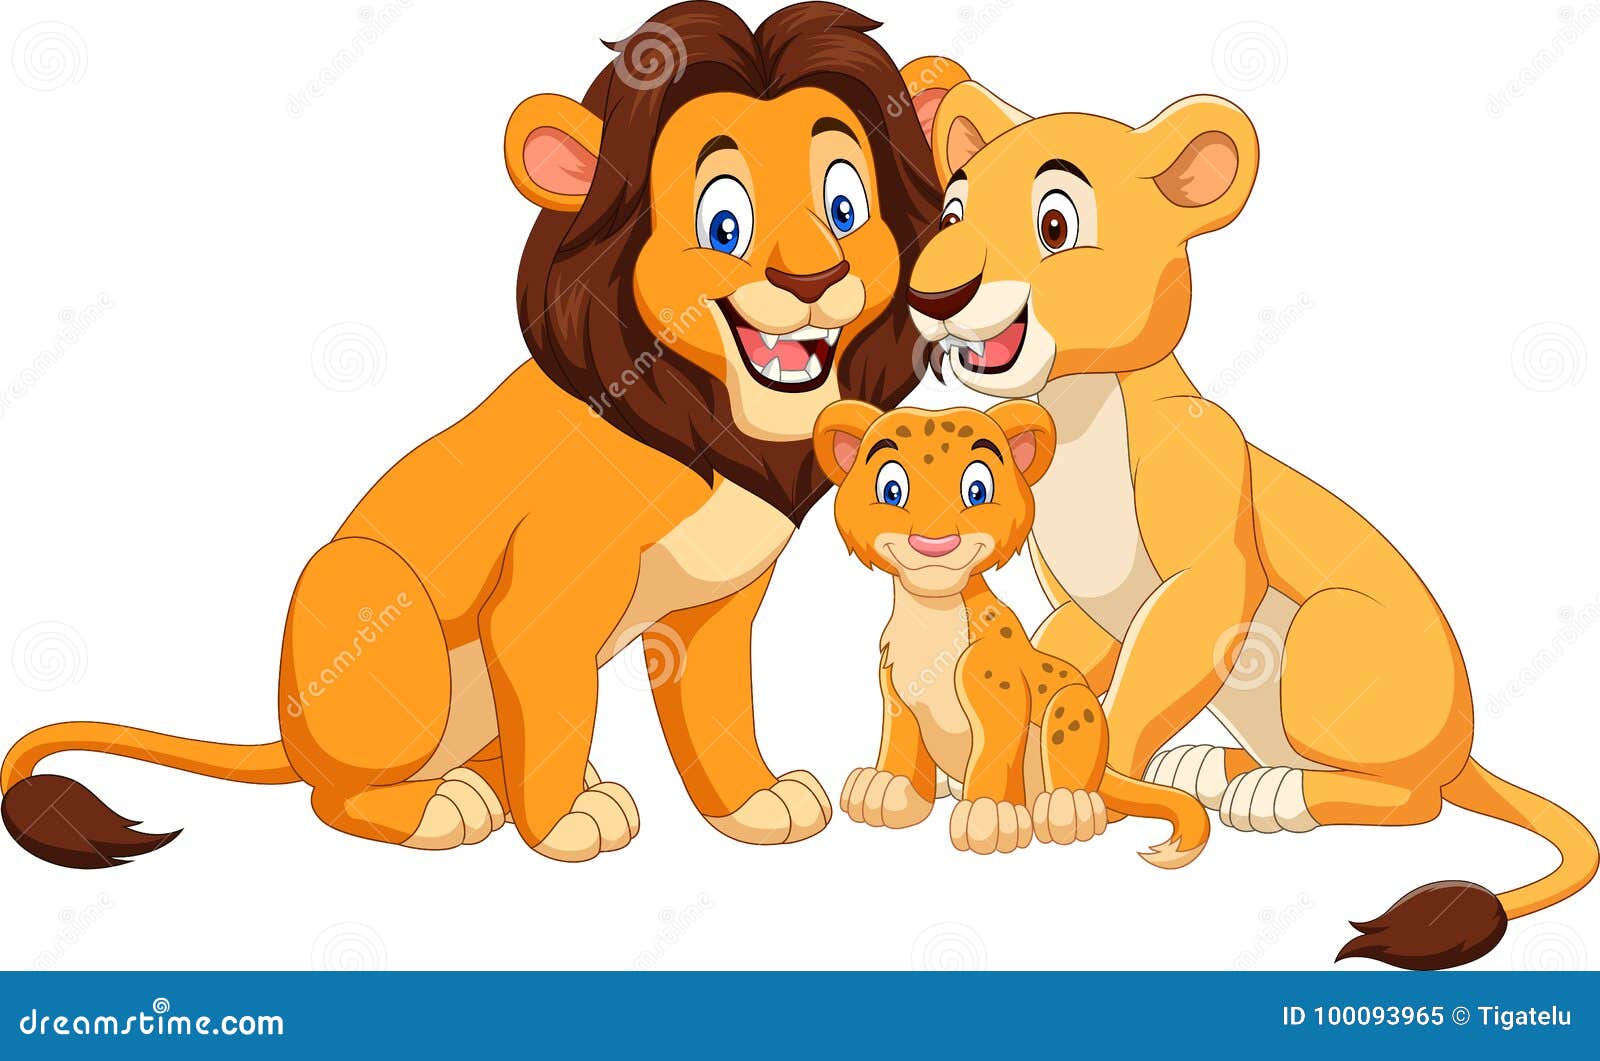 https://thumbs.dreamstime.com/z/illustration-cartoon-lion-family-isolated-white-background-cartoon-lion-family-isolated-white-background-100093965.jpg